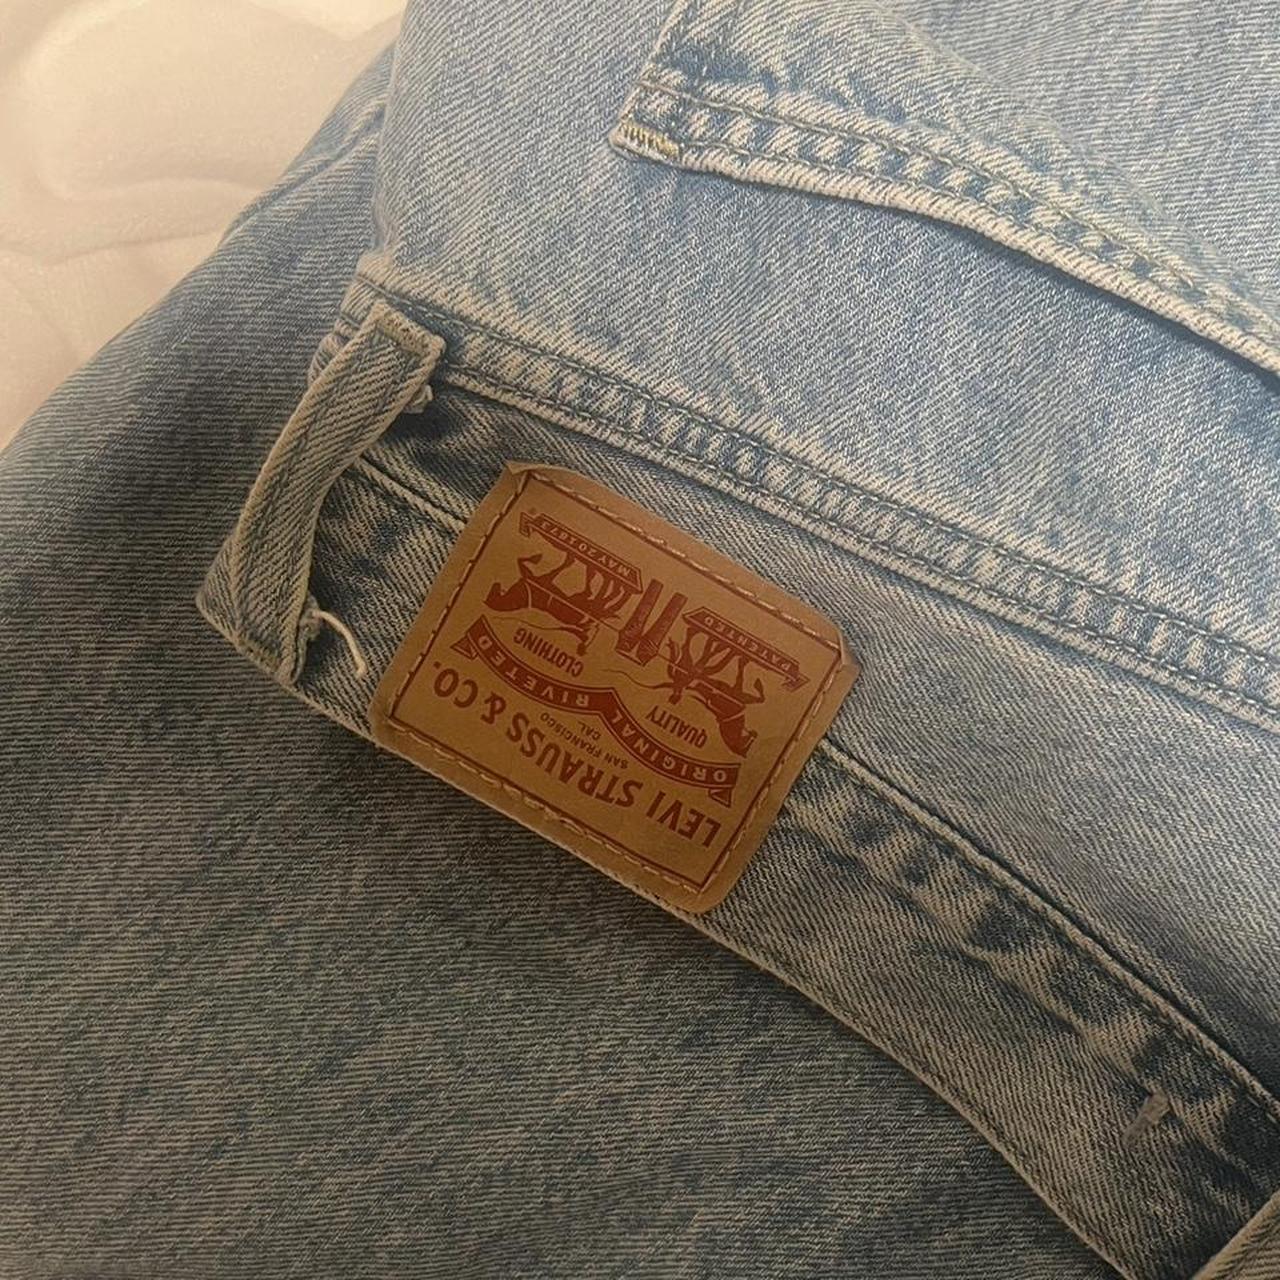 Levi’s Low Pros in color Charlie Glow Up ⭐️ Worn,... - Depop